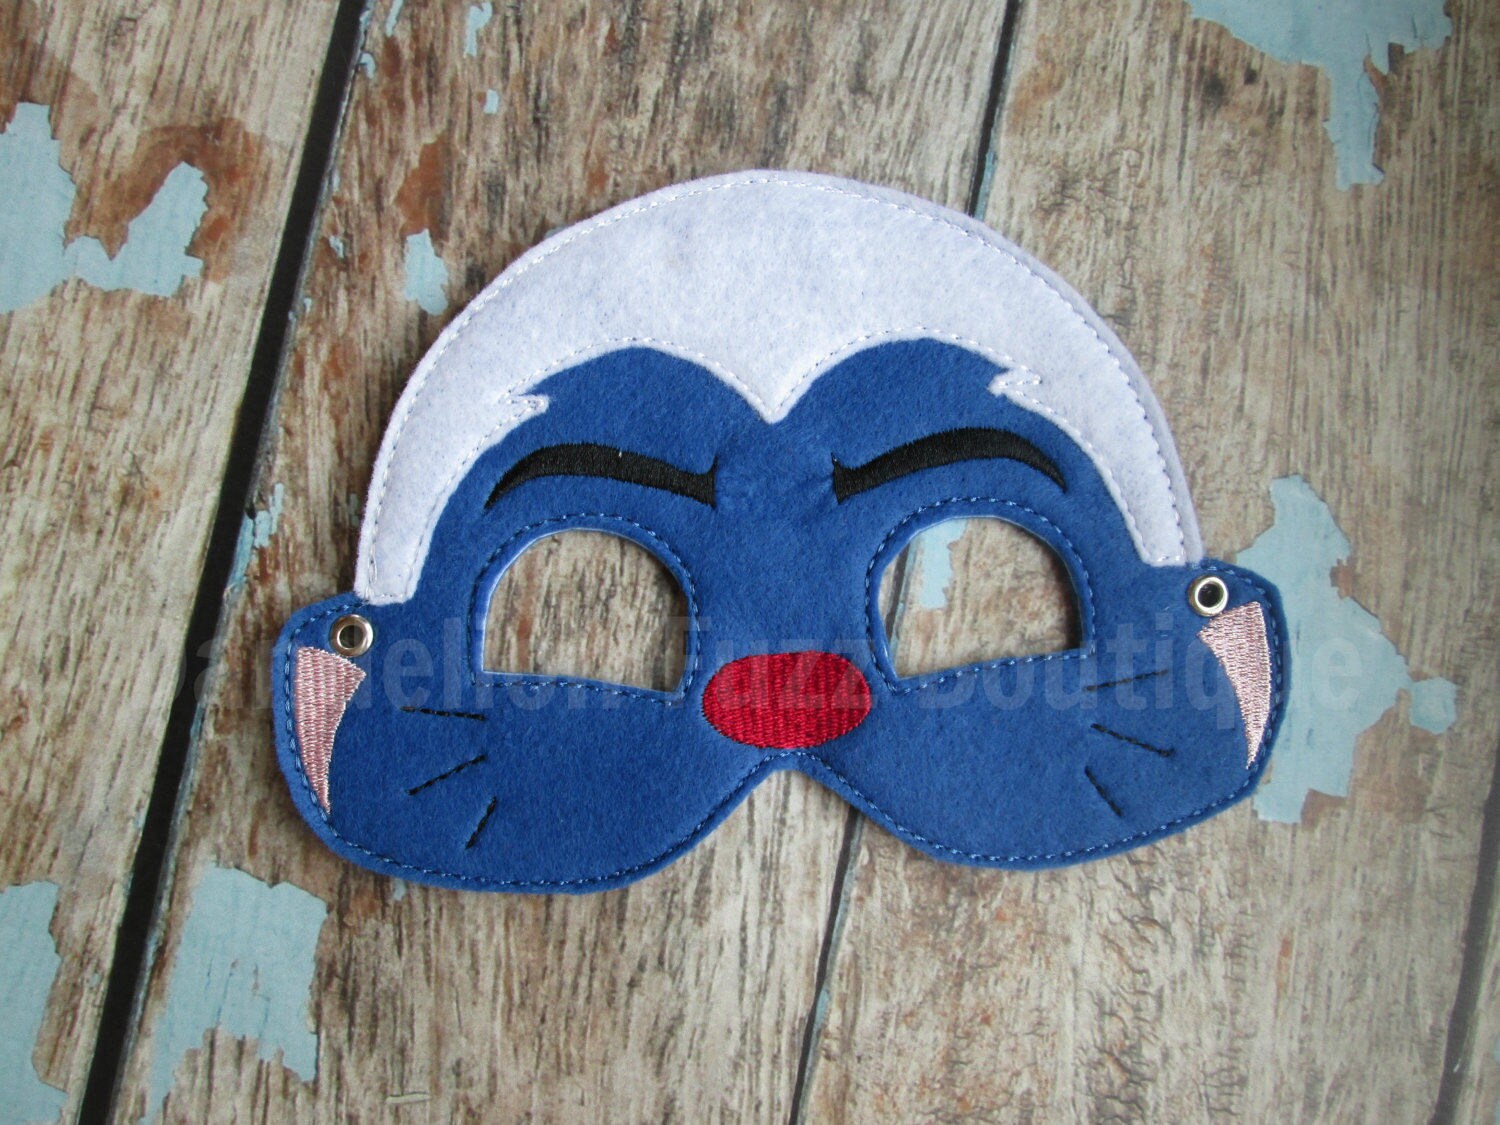 Bunga Inspired Felt Mask, Lion Guard Inspired Dress Up Masks and Party Favors, Pretend Play, Lion Guard Gift, Present,  Lion Guard Party